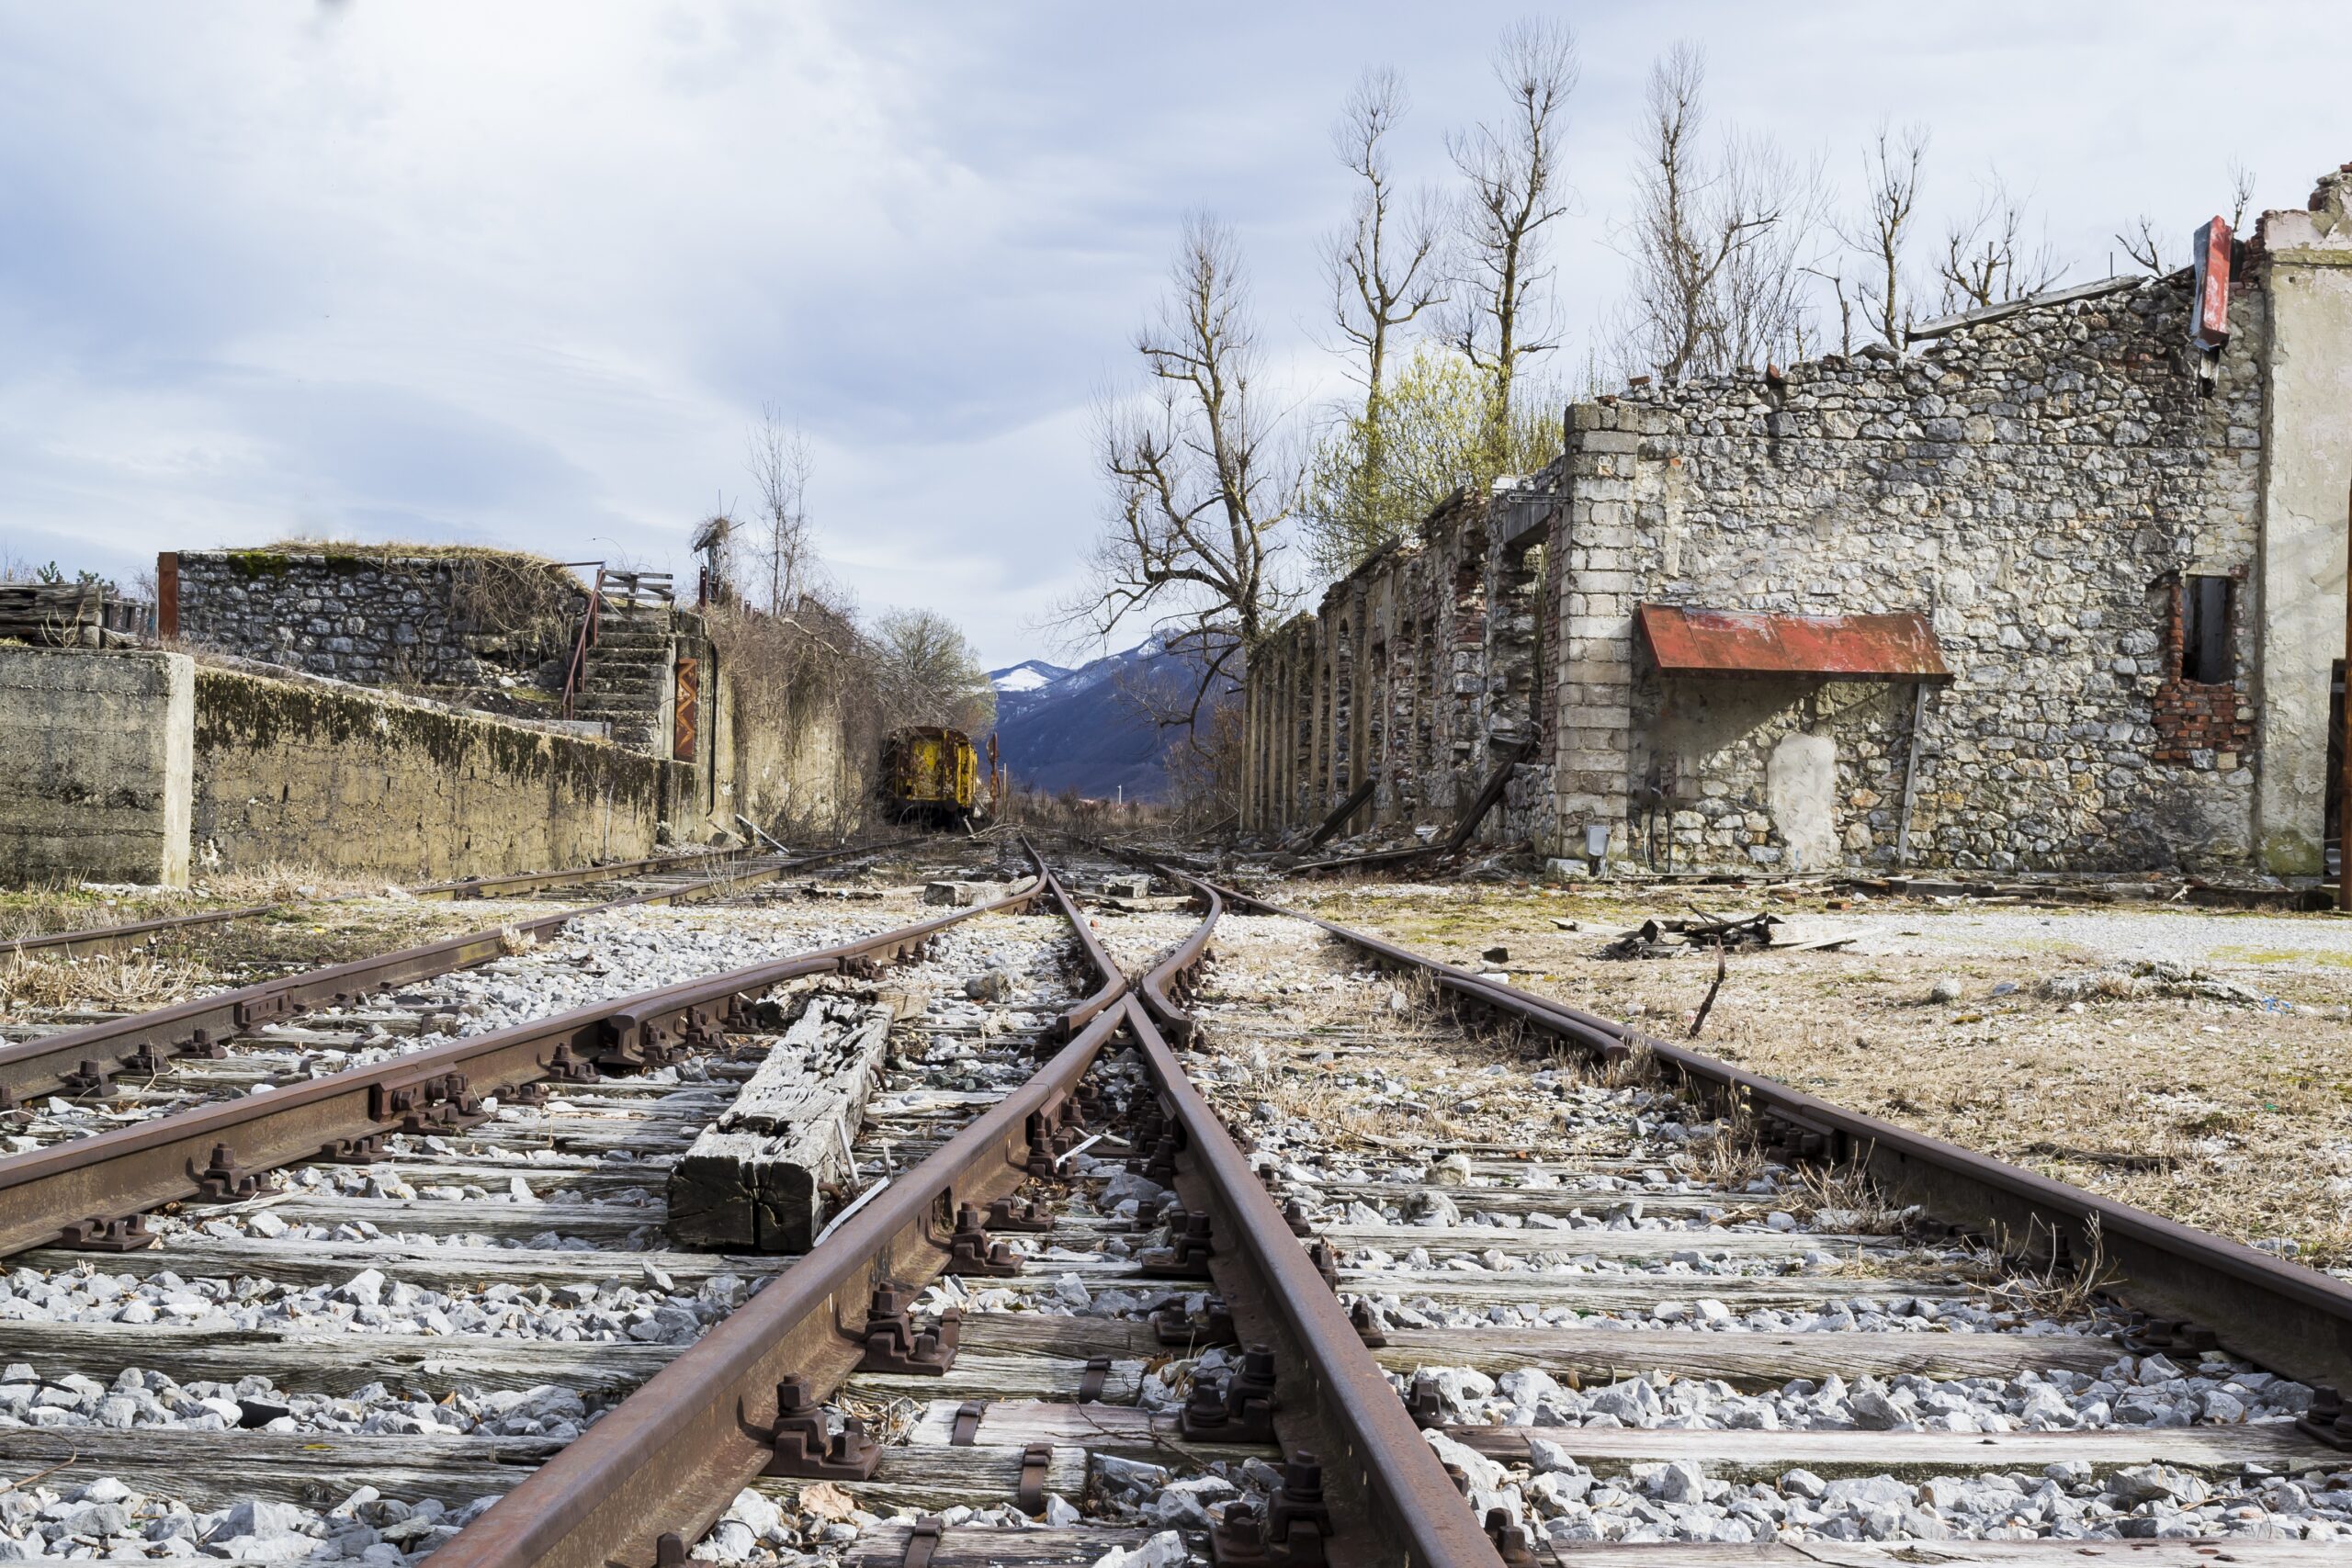 Obtaining Monetary Compensation as a Railroad Worker